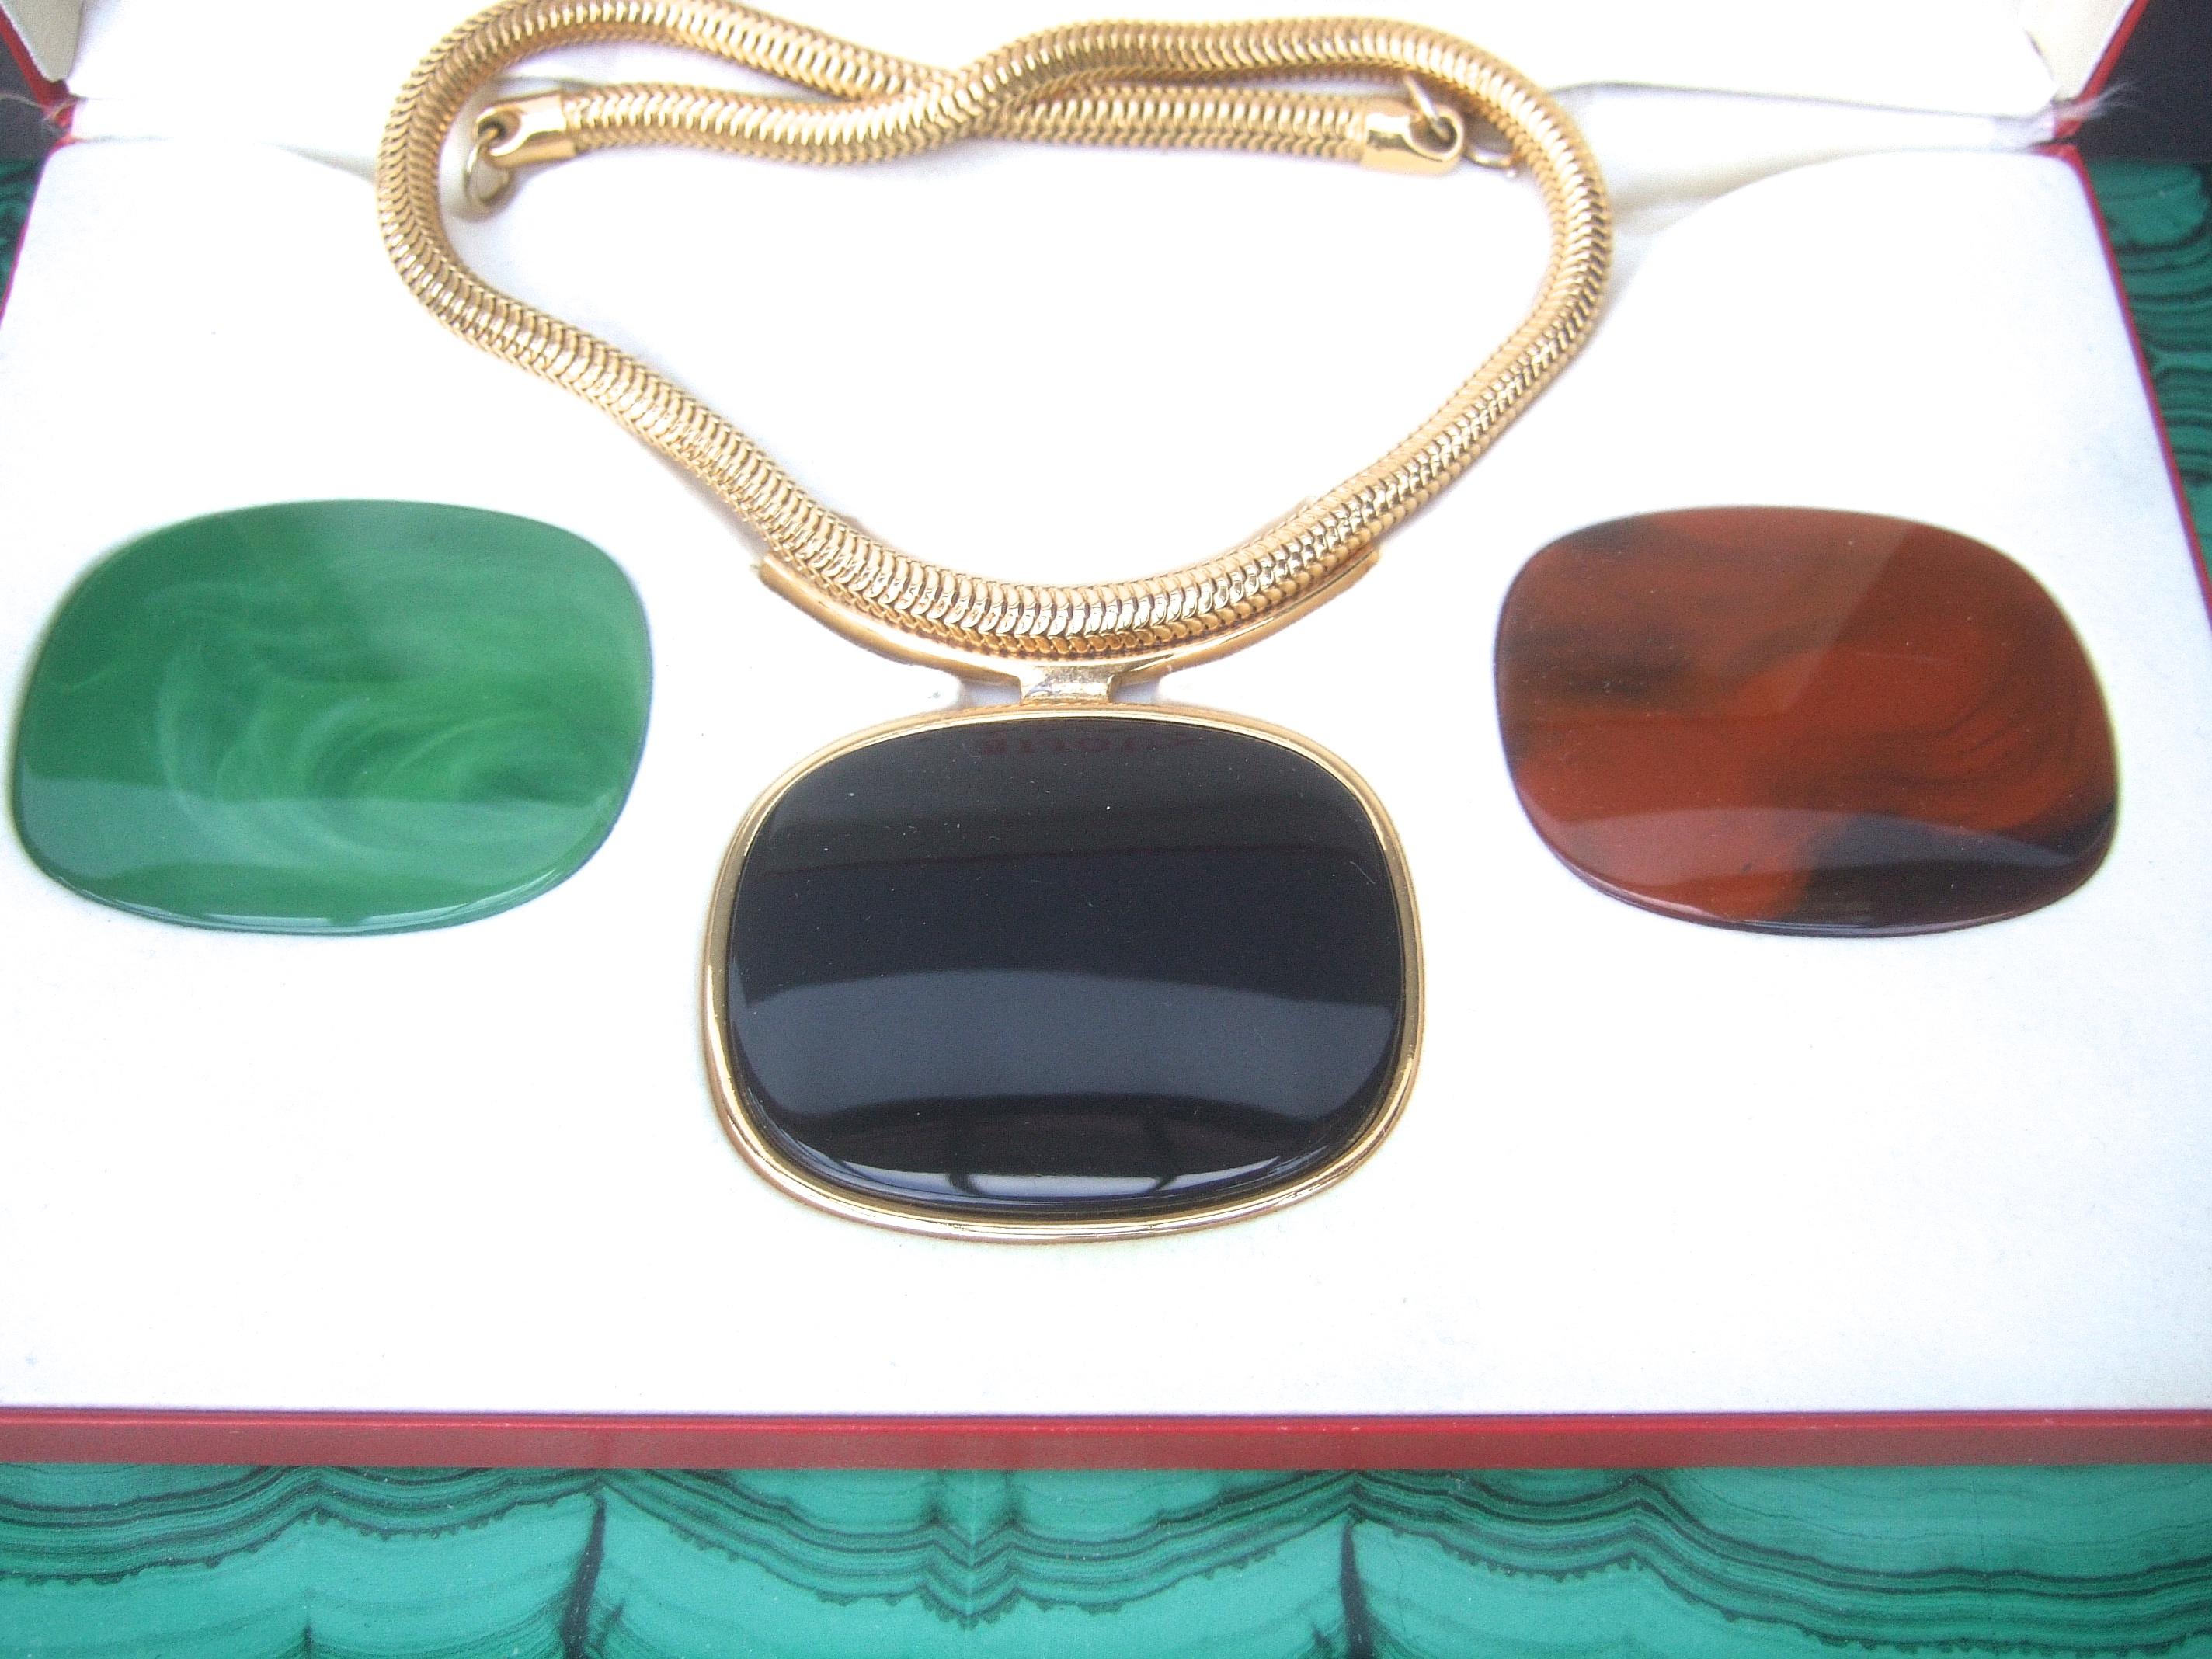 Lanvin Paris Sleek resin pendant choker necklace in Lanvin presentation box c 1970s
The iconic Lanvin choker necklace is designed with three molded resin large-scale interchangeable pendants. The trio of resin pendants range in color from jade